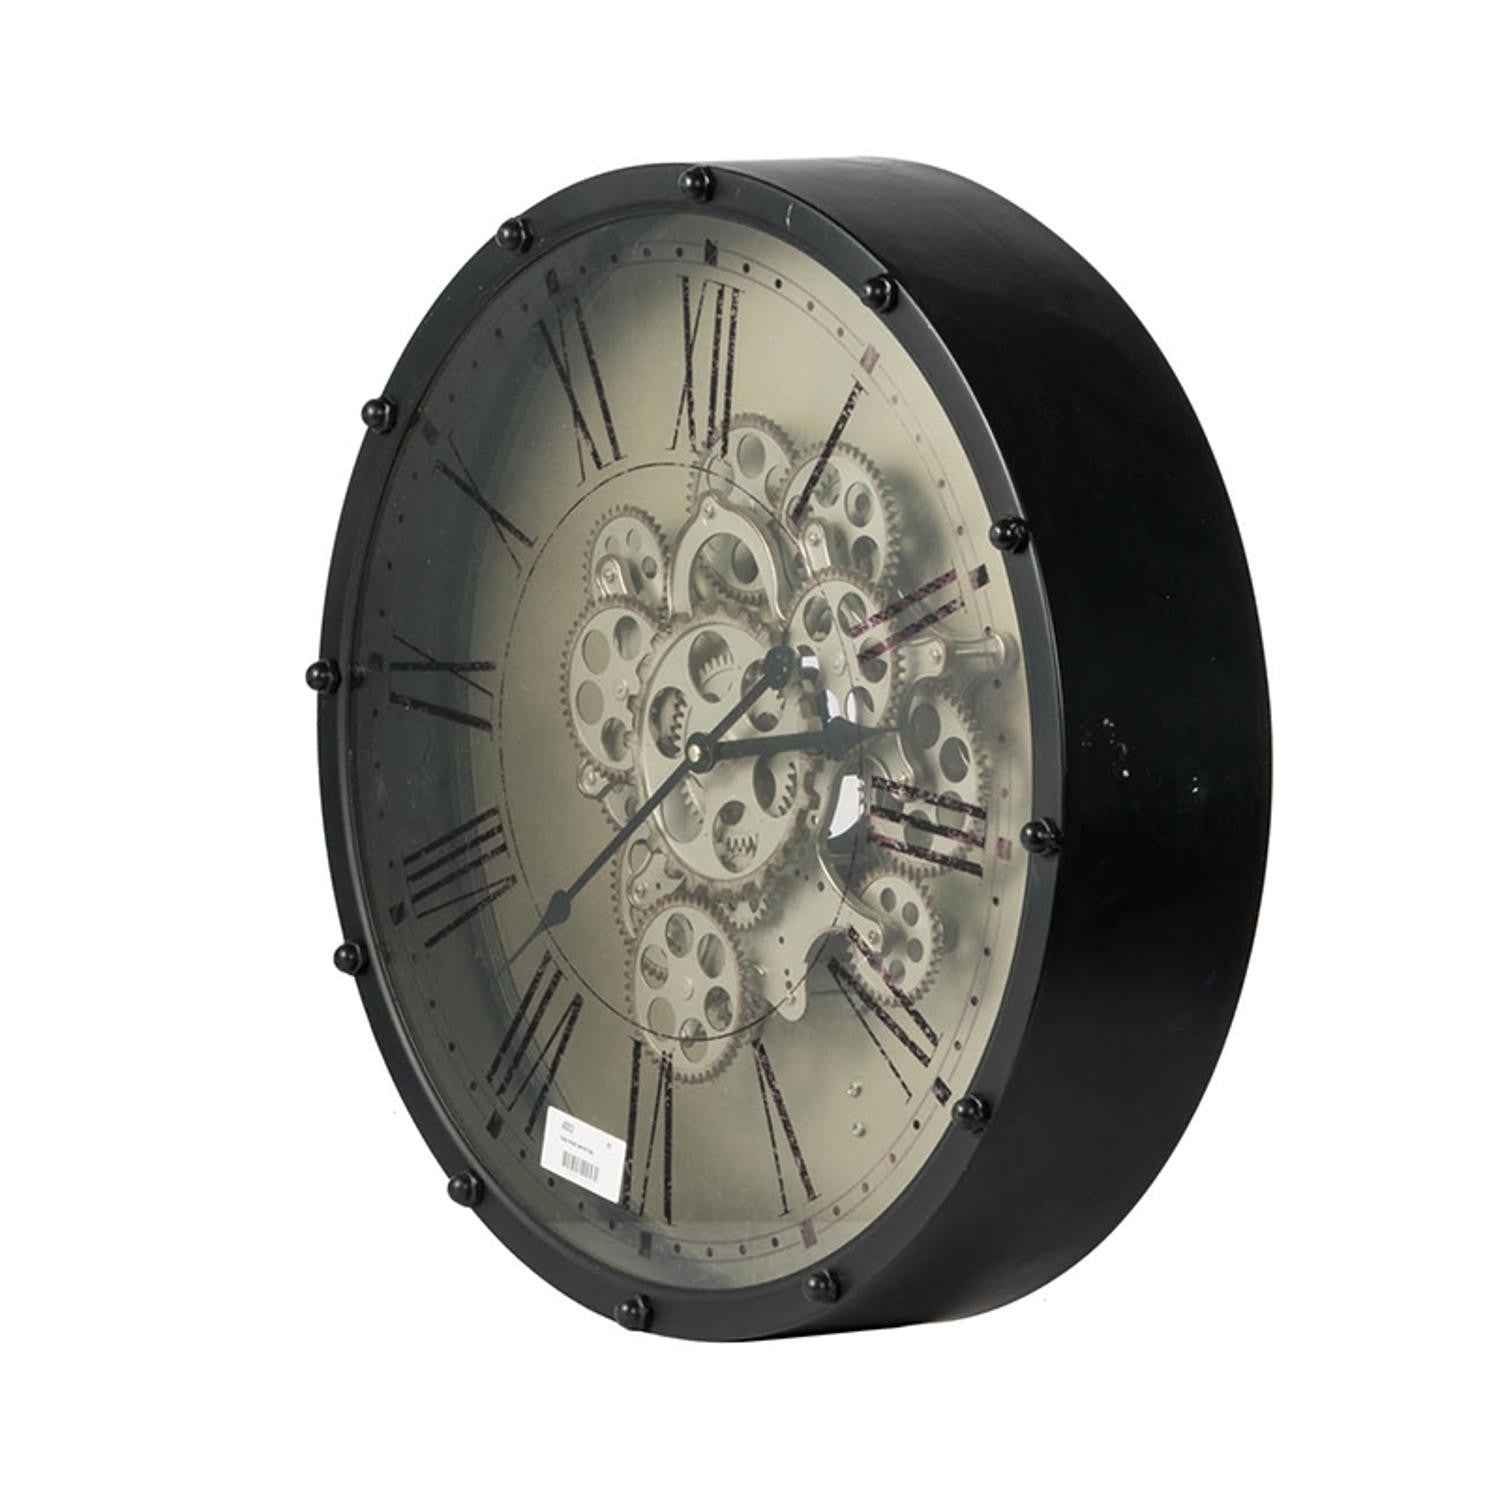 18" Black and Ivory Vintage Gear Industrial Wall Clock